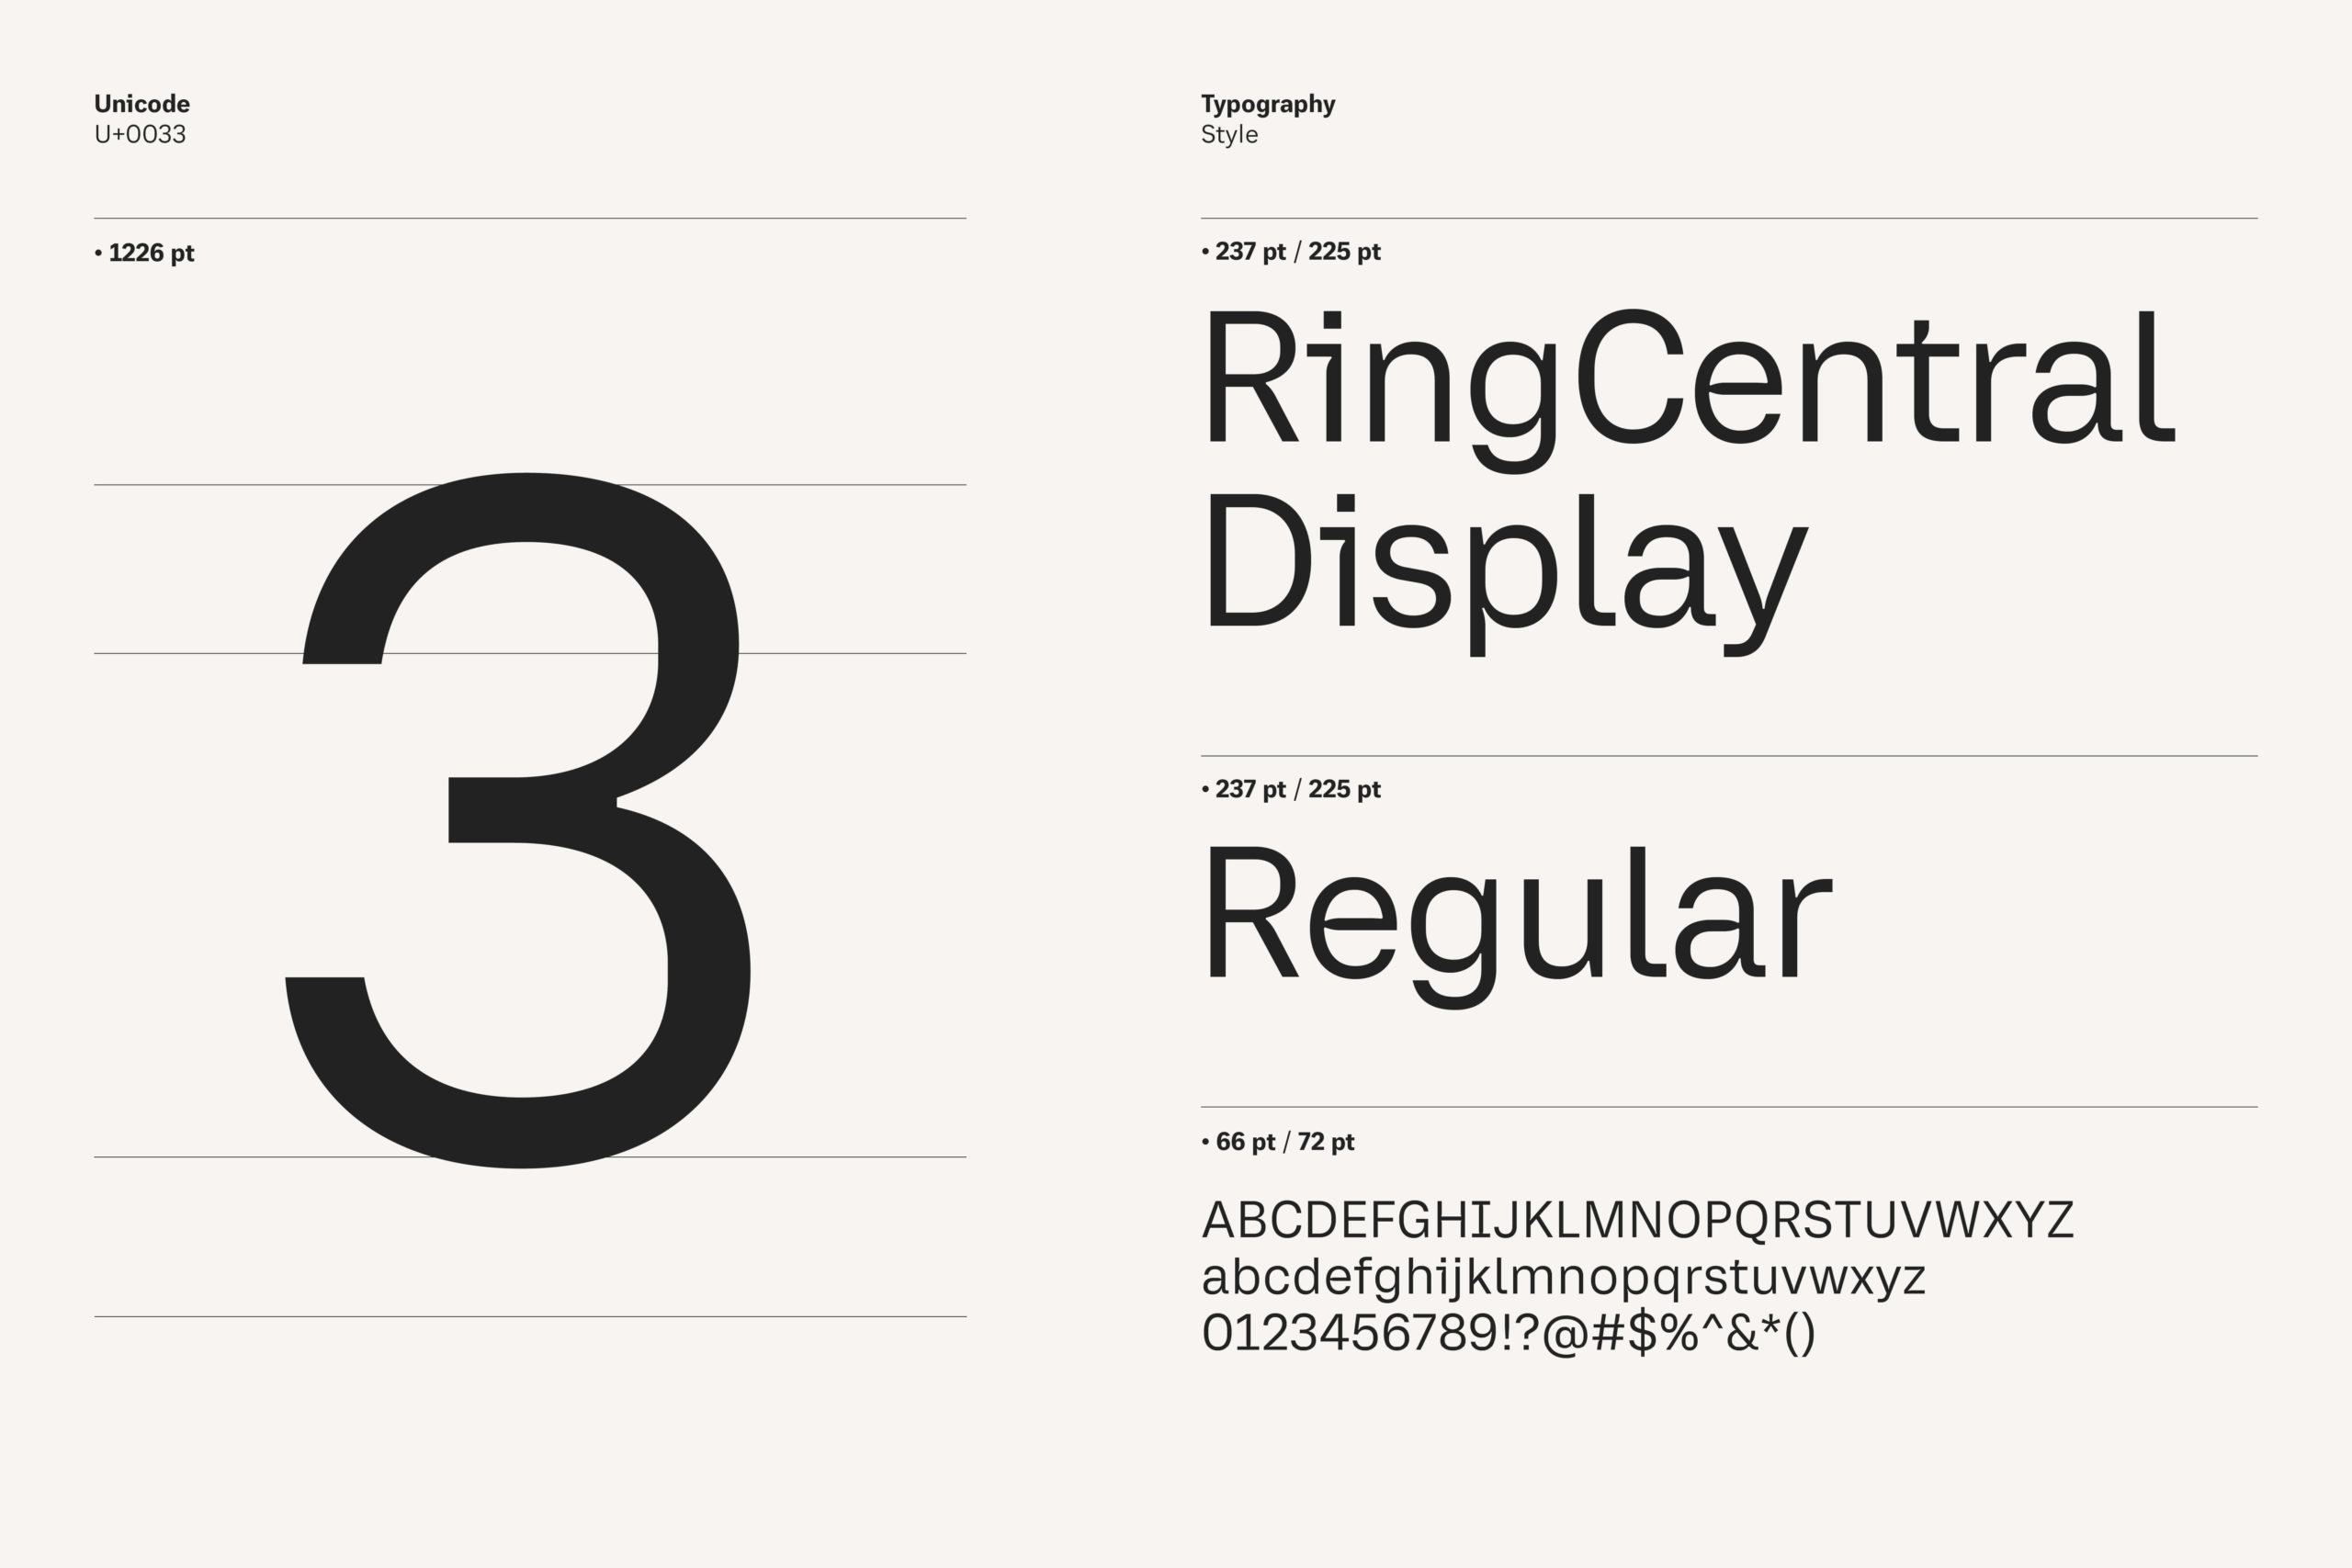 RingCentral Display_Typeface_09142215